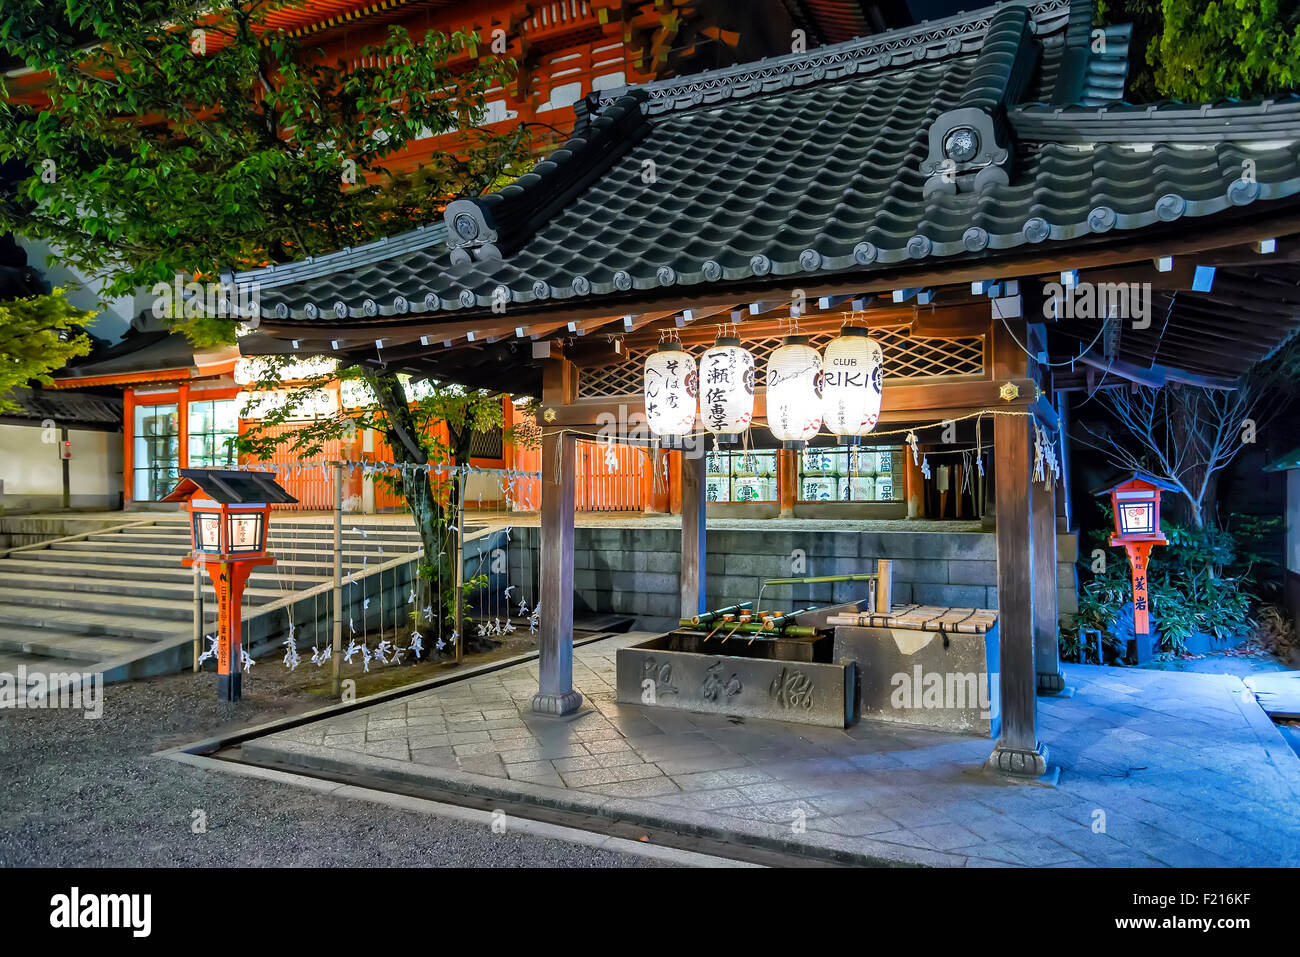 Yasaka Shrine, once called Gion Shrine, is a Shinto shrine in the Gion District of Kyoto, Japan. Stock Photo